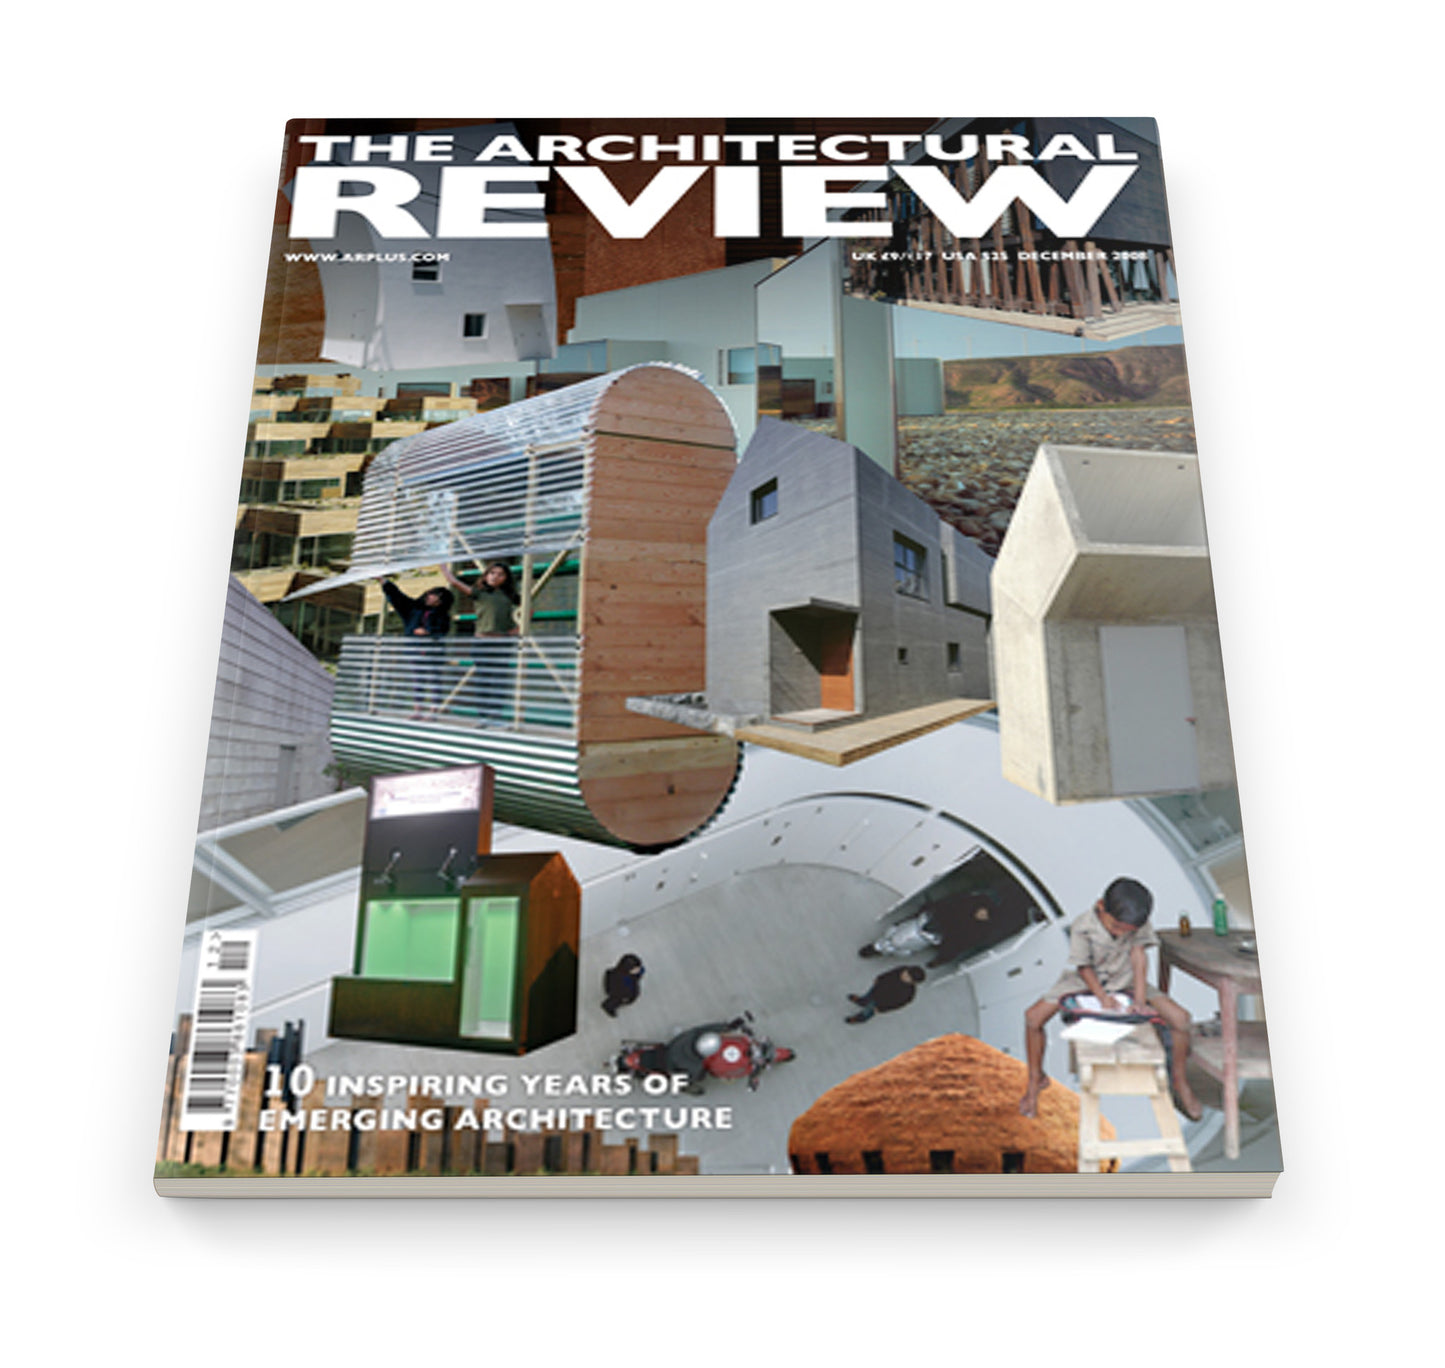 The Architectural Review Issue 1342, December 2008